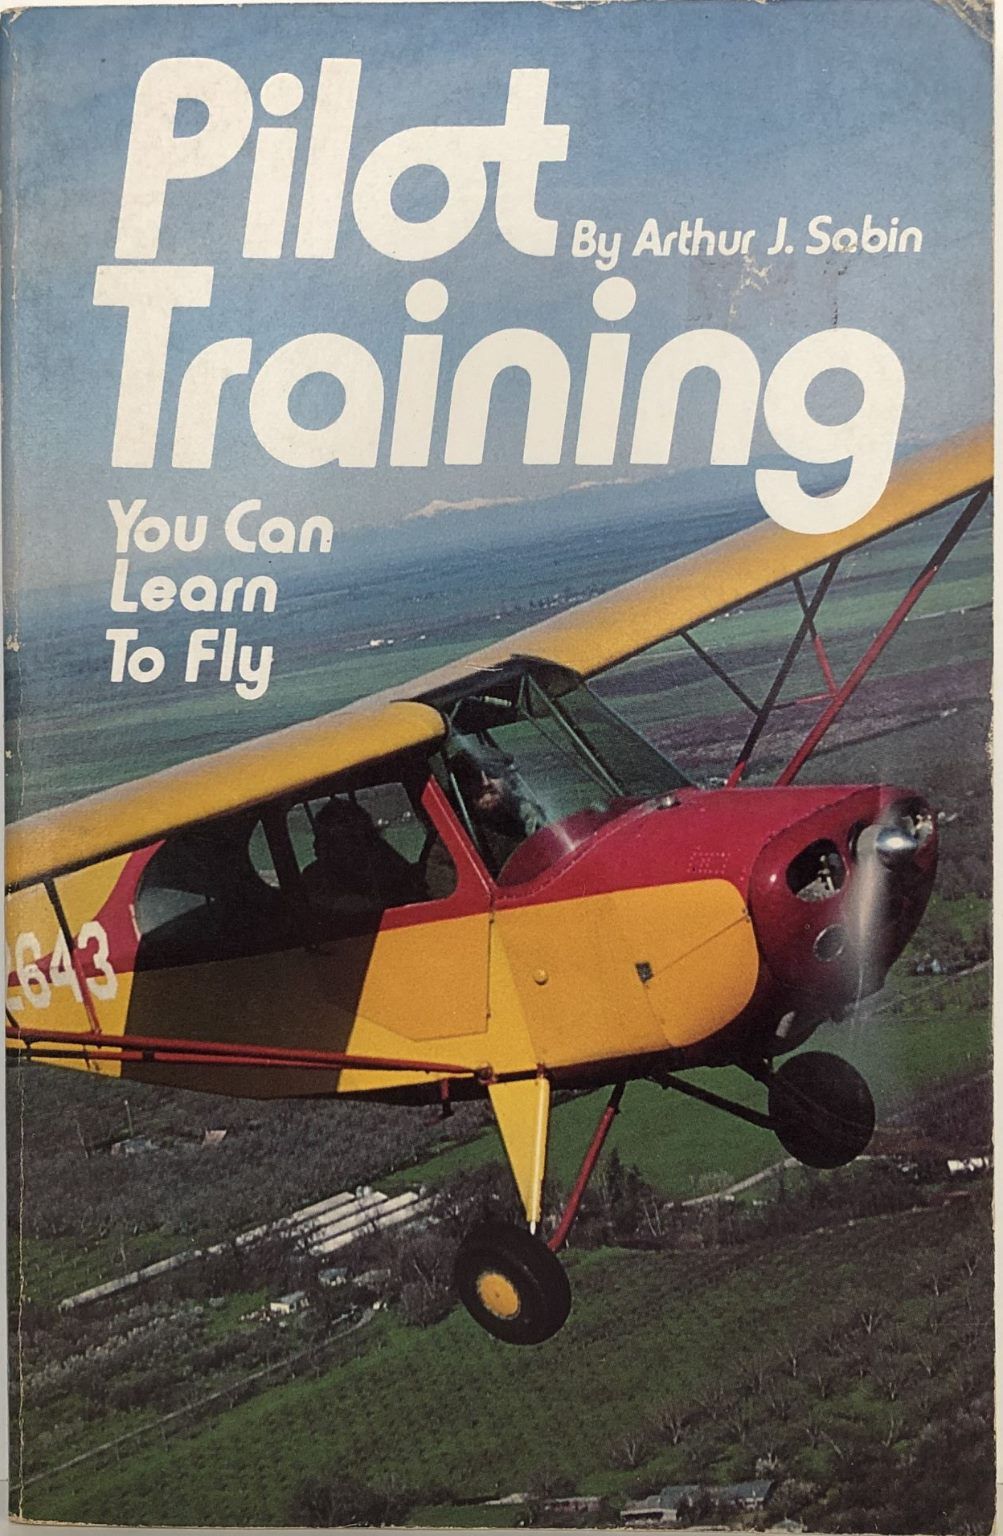 PILOT TRAINING: You Can Learn to Fly